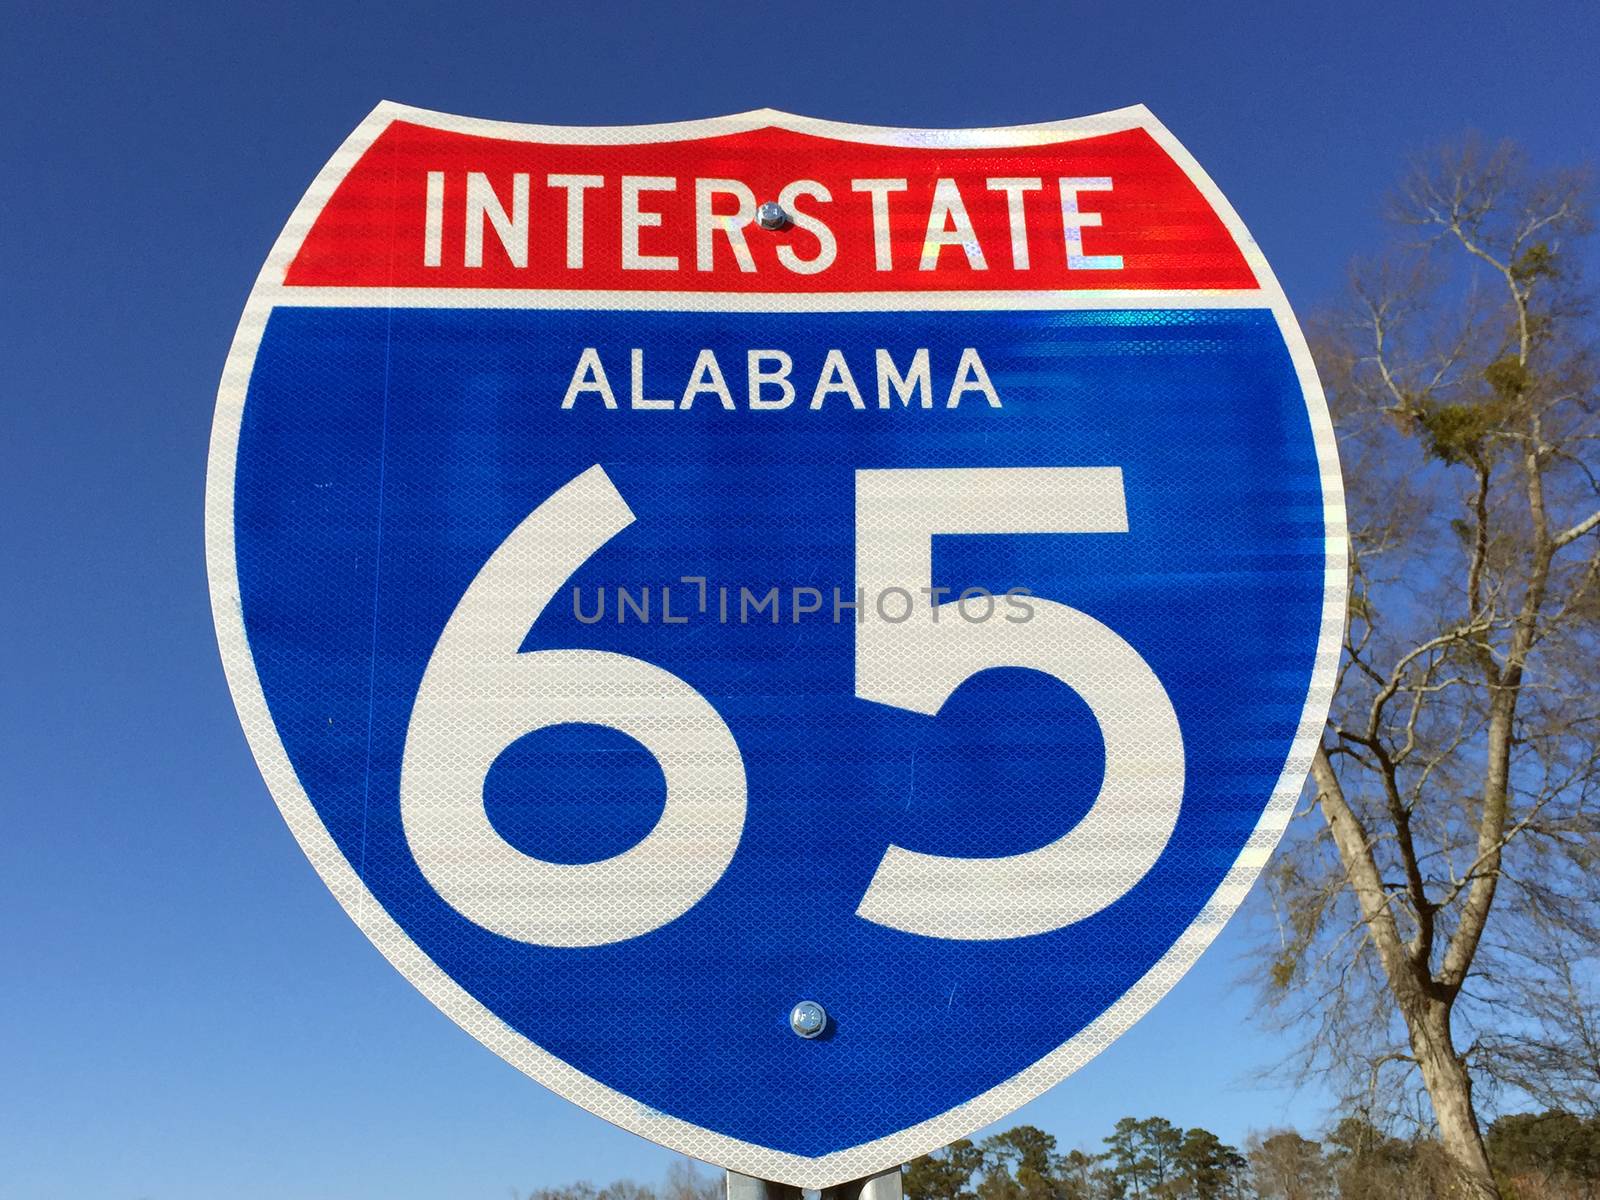 Highway sign for I-65 in Alabama by jimmartin